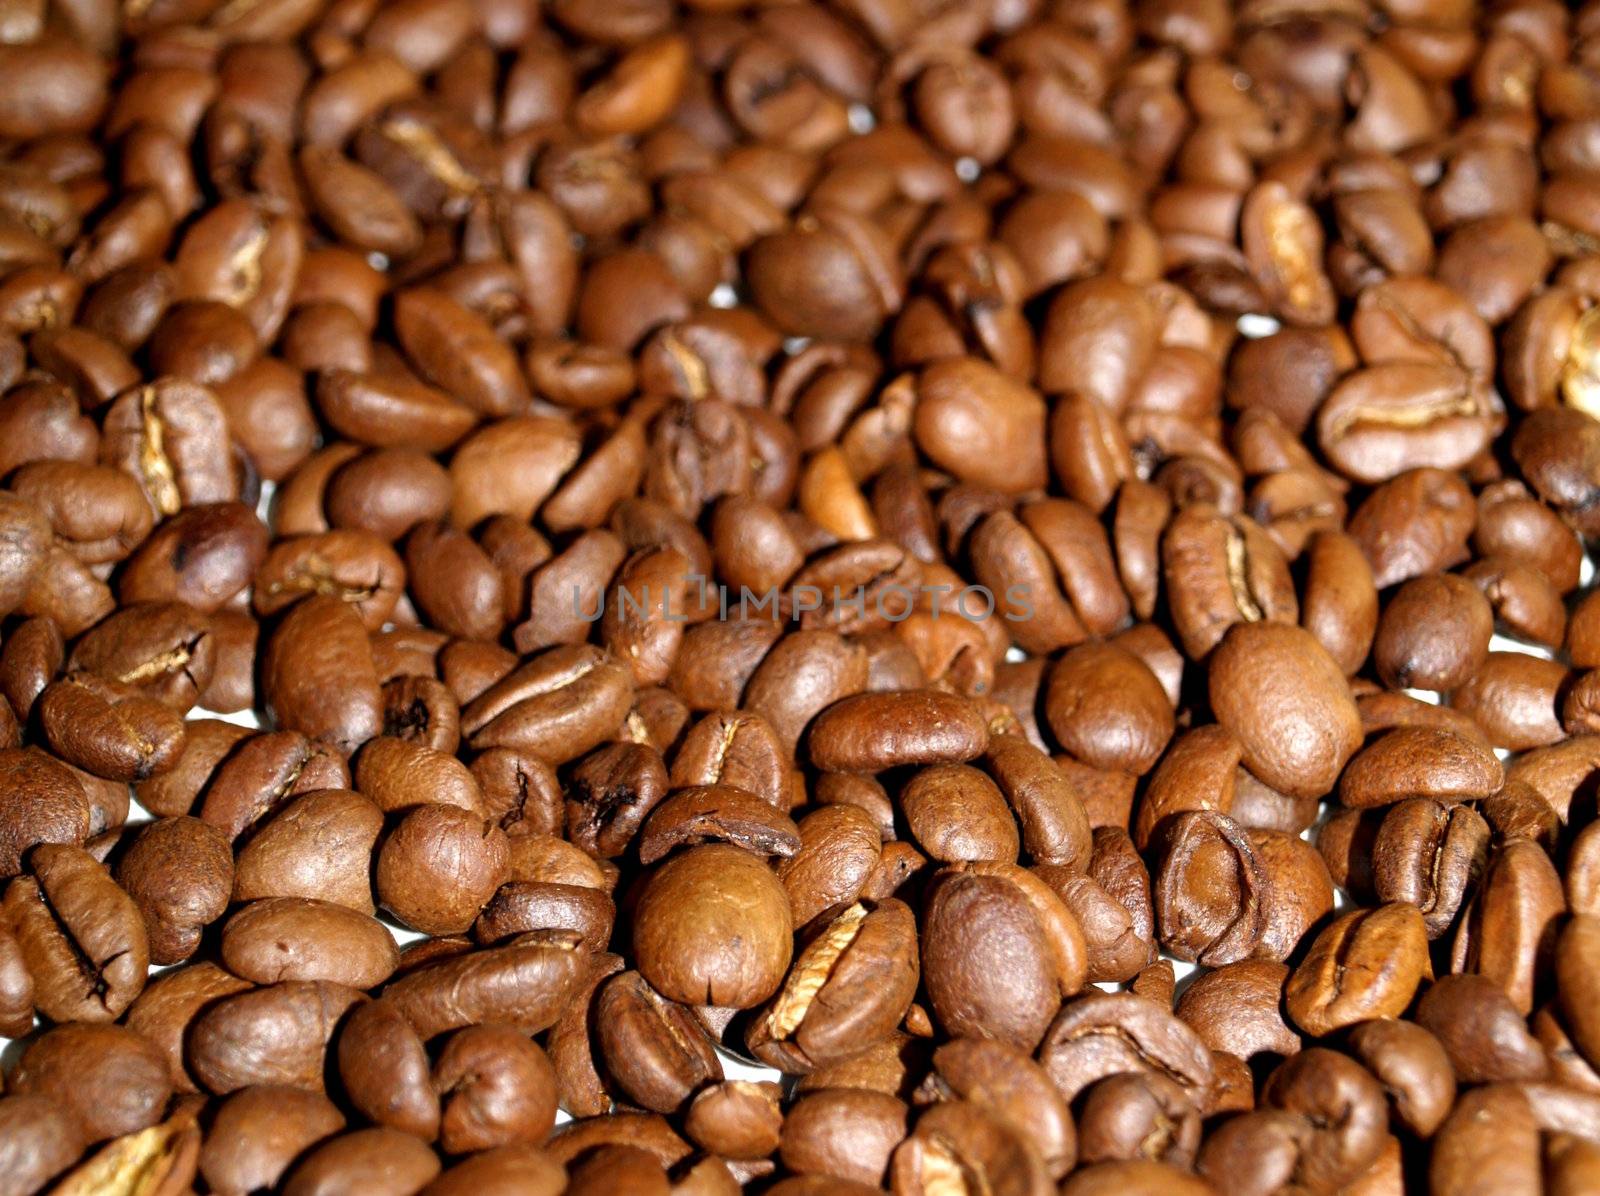 many coffee beans